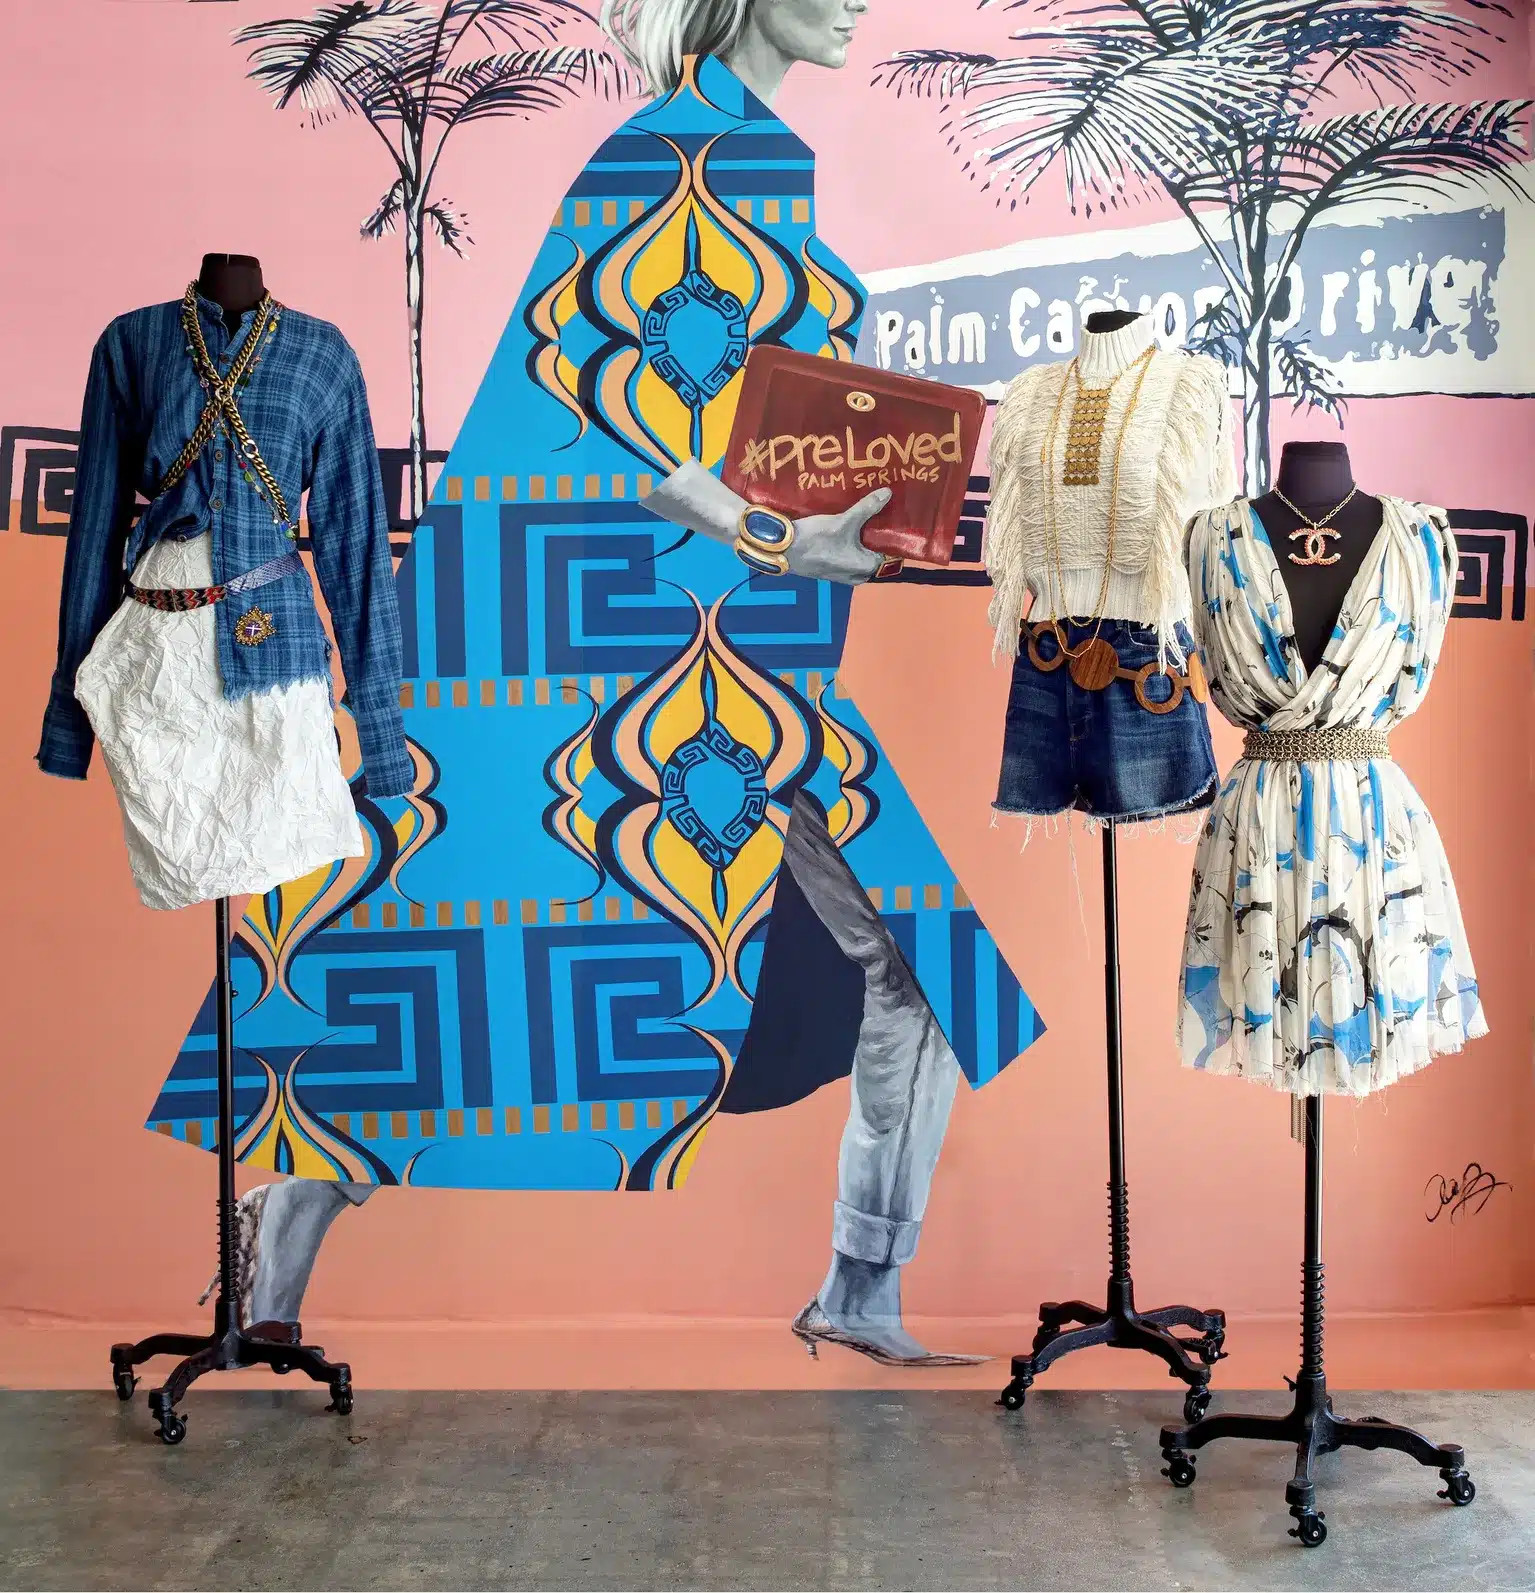 A display of three mannequins with stylish outfits against a colorful mural wall, featuring geometric patterns and a partial illustration of a woman's silhouette. The center mannequin is holding a sign that says "#preLoved PALM SPRINGS."